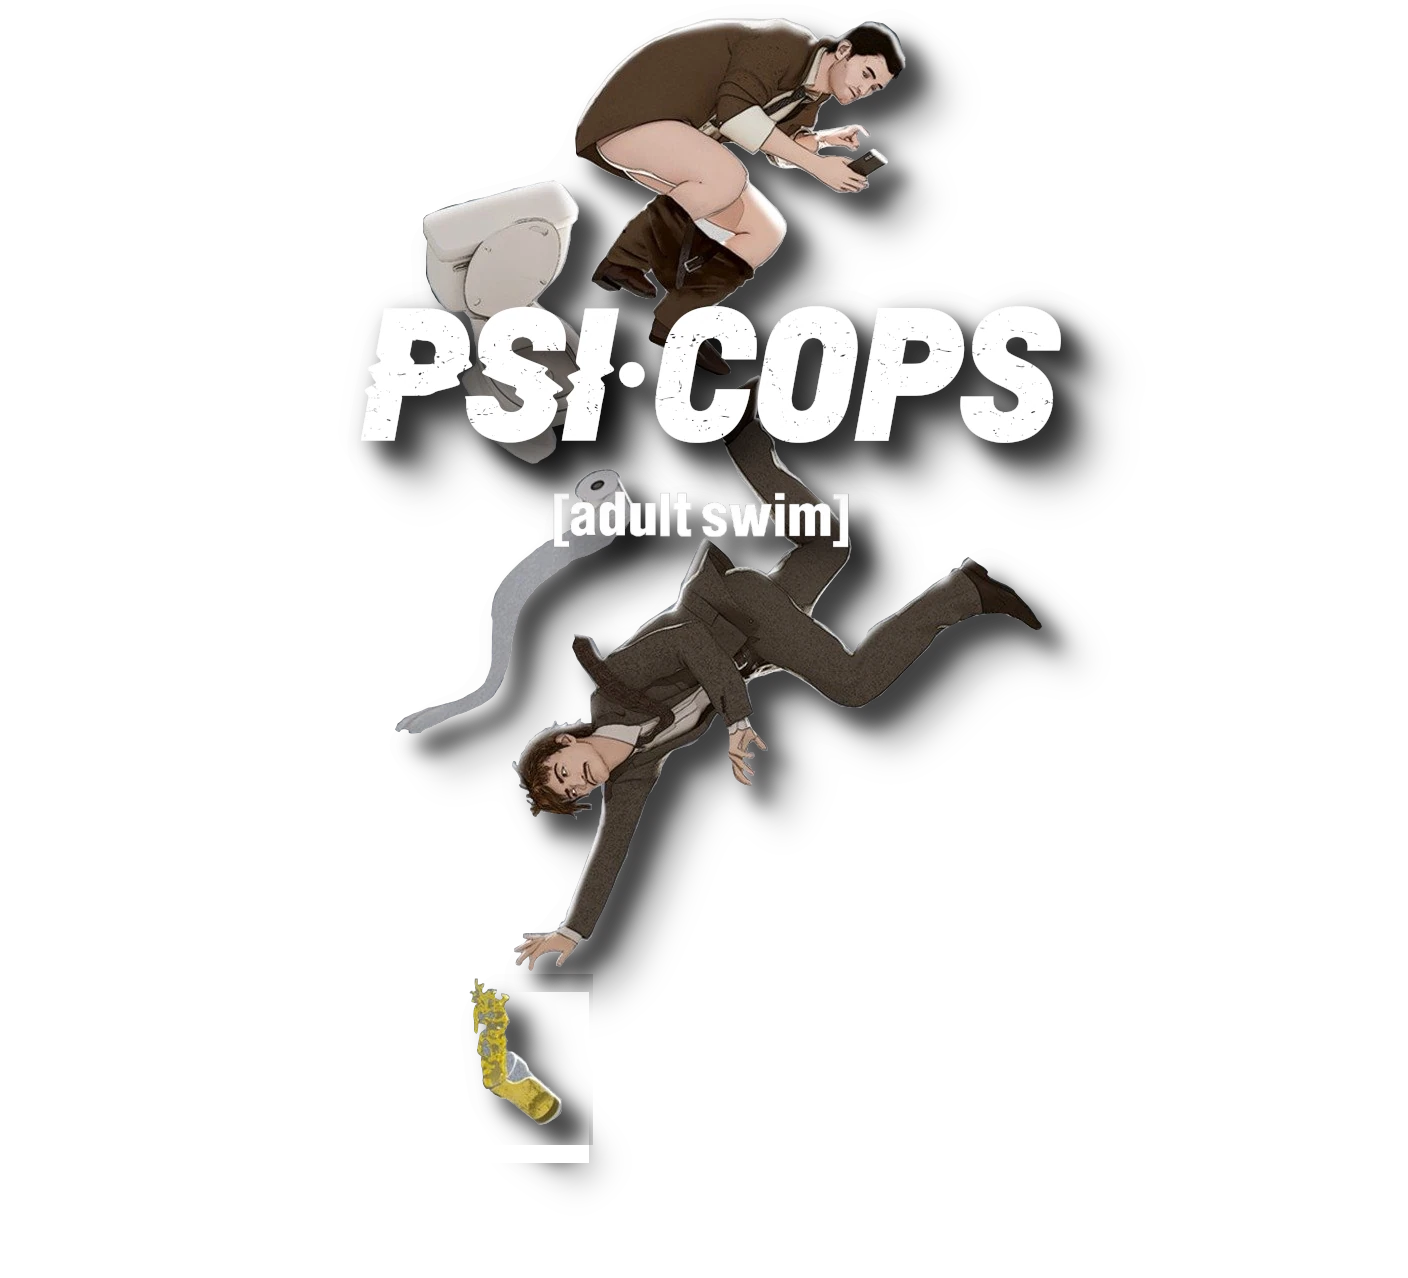 PSI COPS PREMIERES SUNDAY JULY 7TH AT MIDNIGHT ON ADULT SWIM